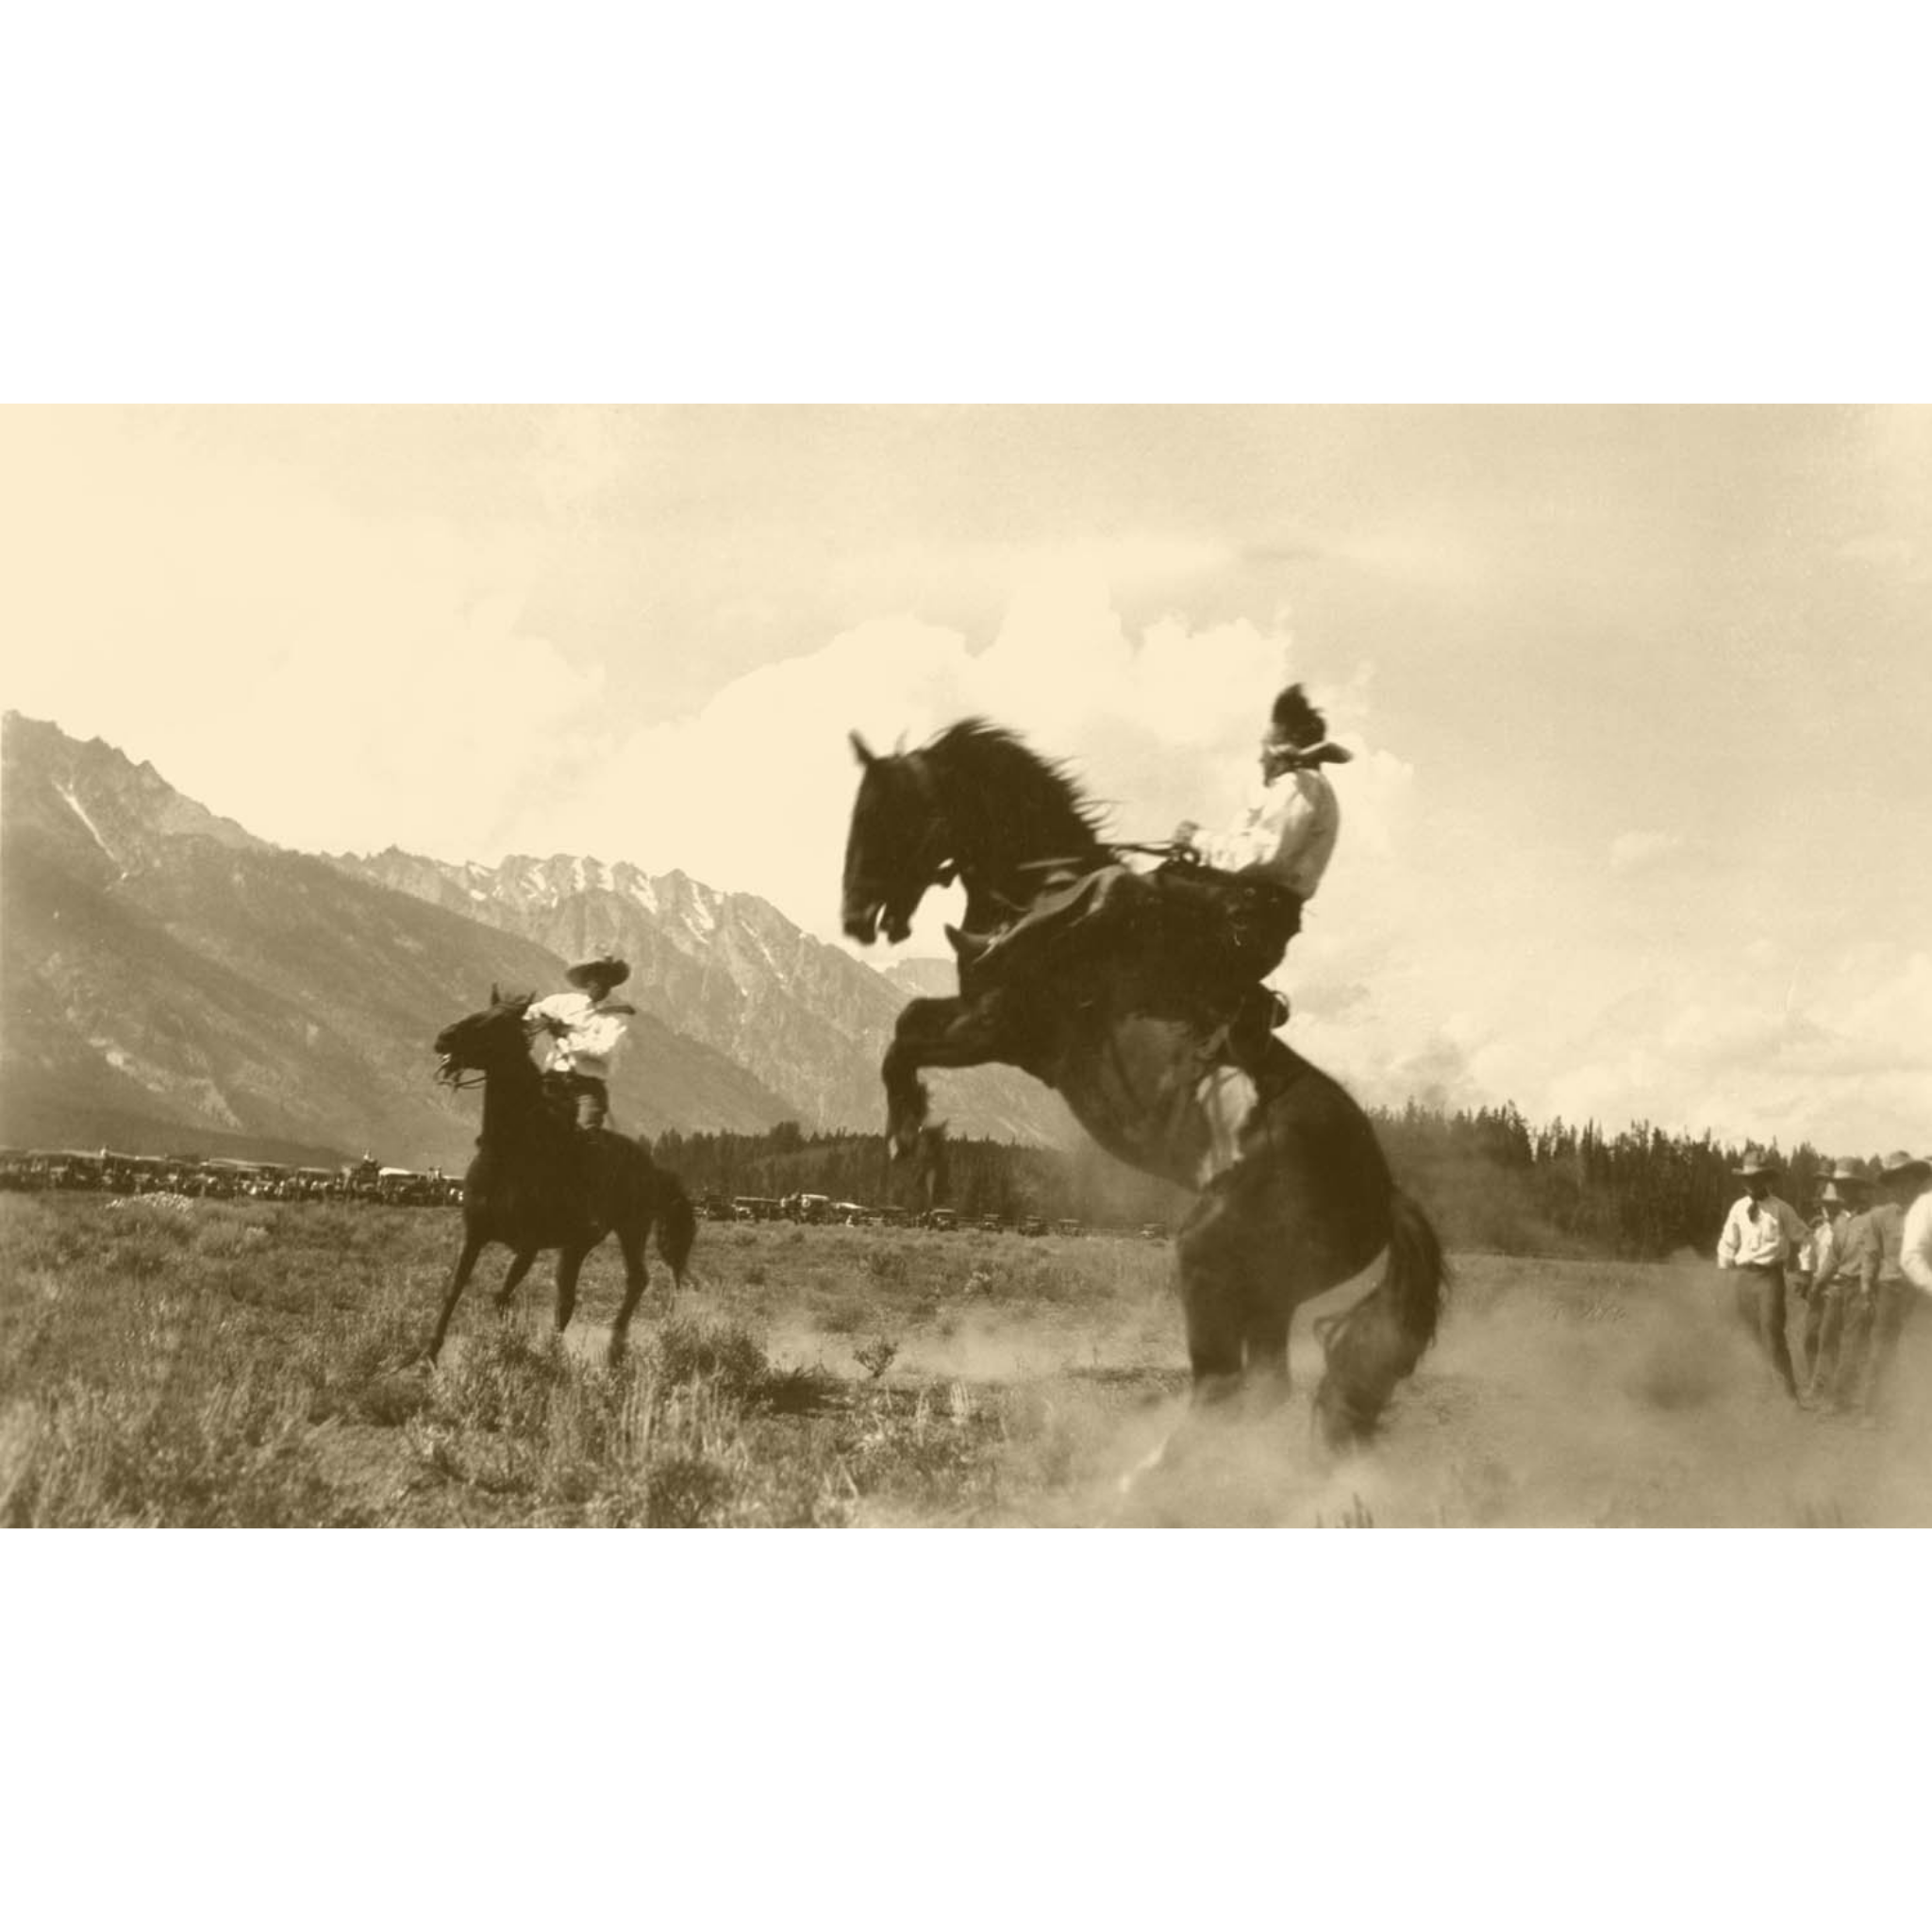 Rodeo Cowboys 7 - Tetons in Background - ca. 1916 Photograph